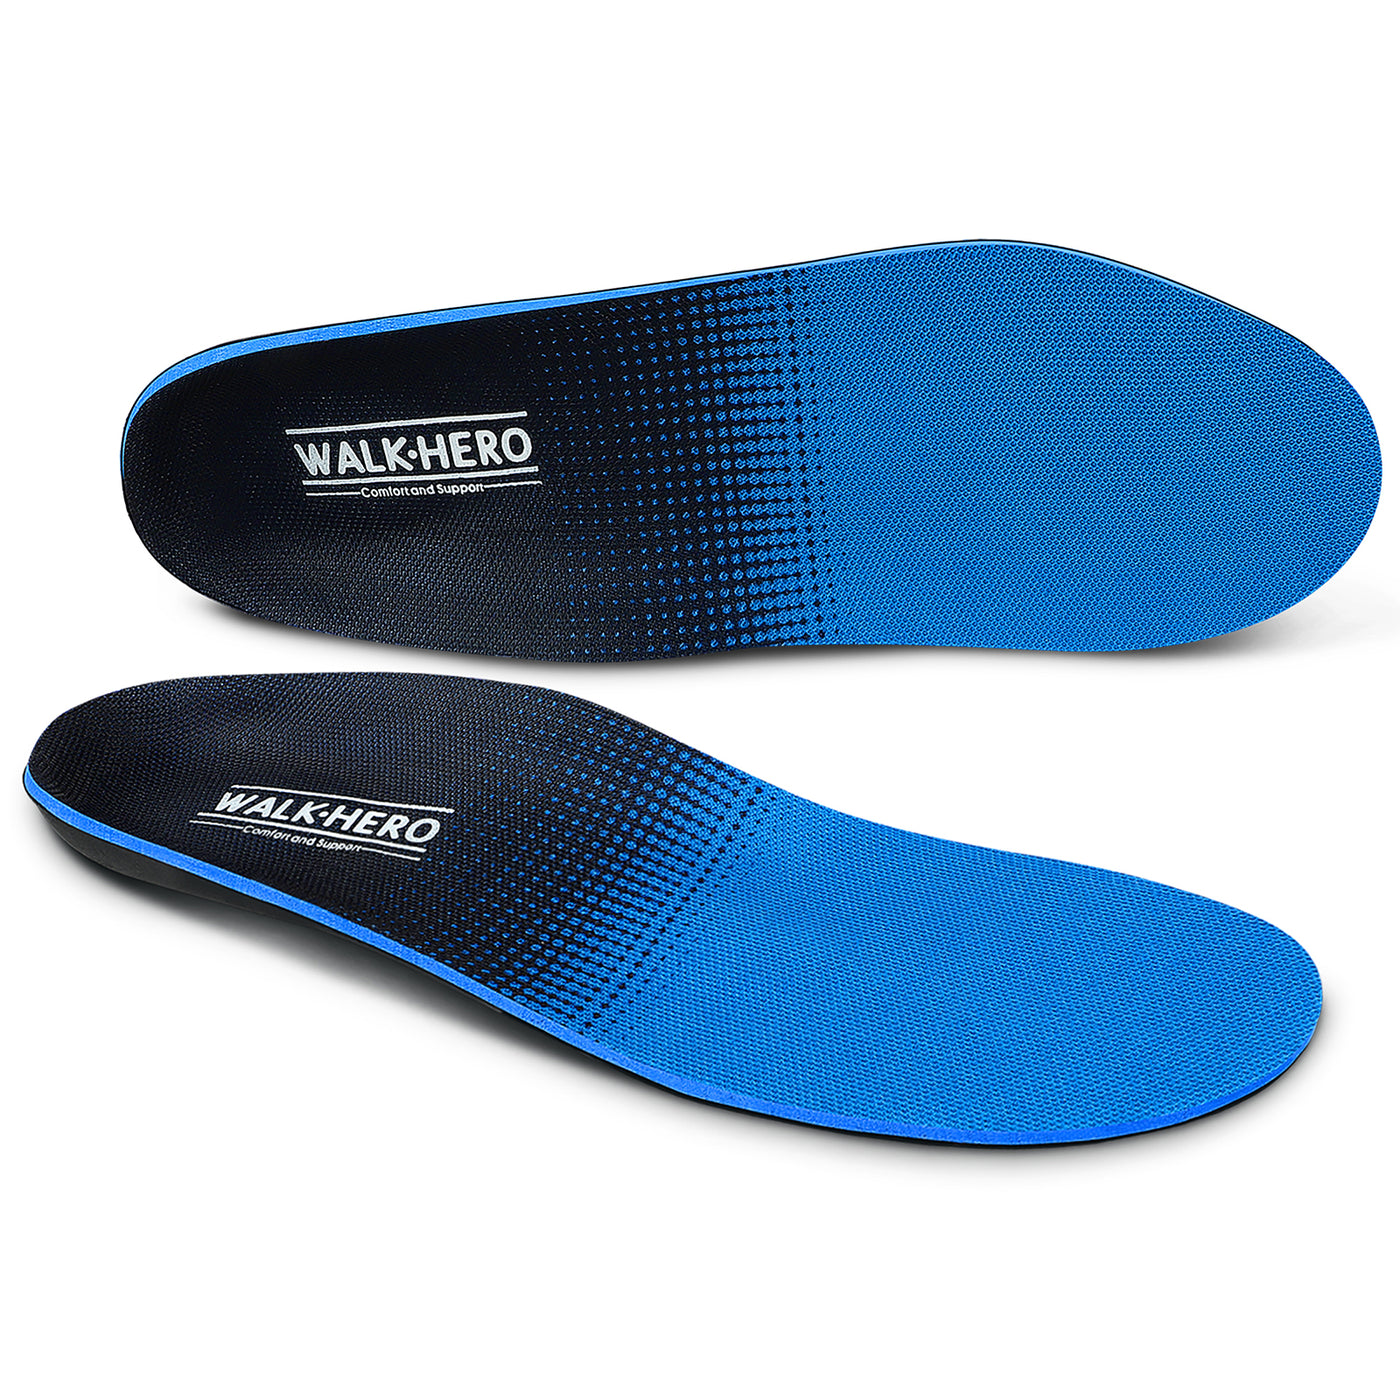 WALKHERO Men's Arch Support Orthotic Insoles Gray & New Blue & Blue 3-Pairs